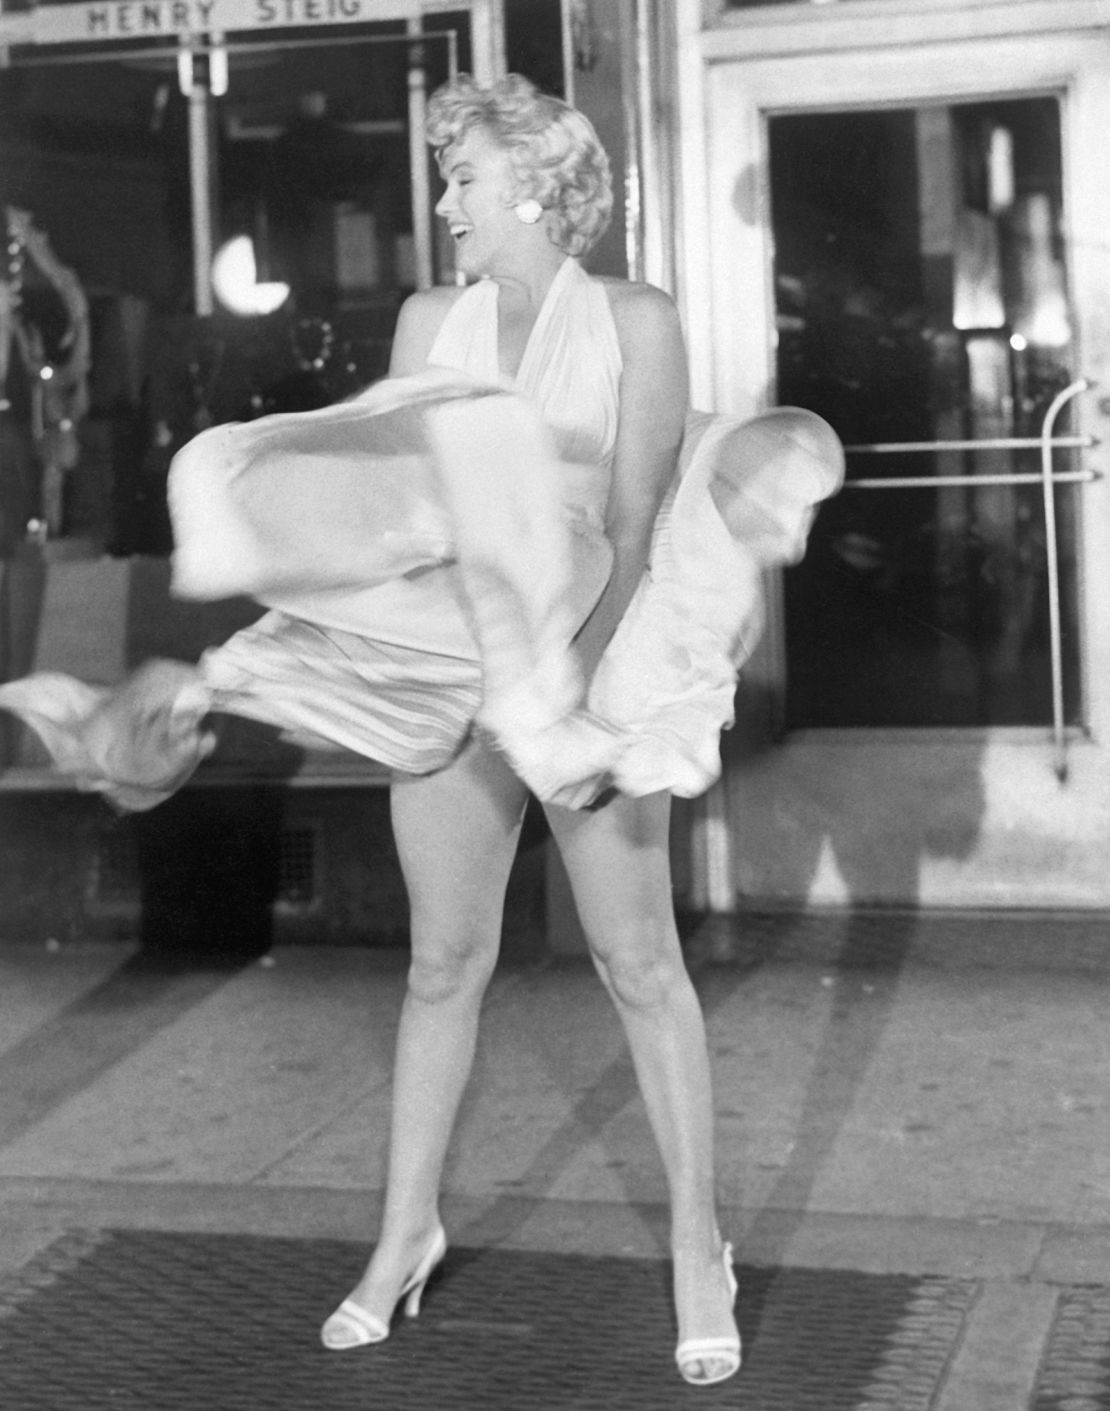 Marilyn Monroe, photographed wearing her famous white dress for "The Seven Year Itch."